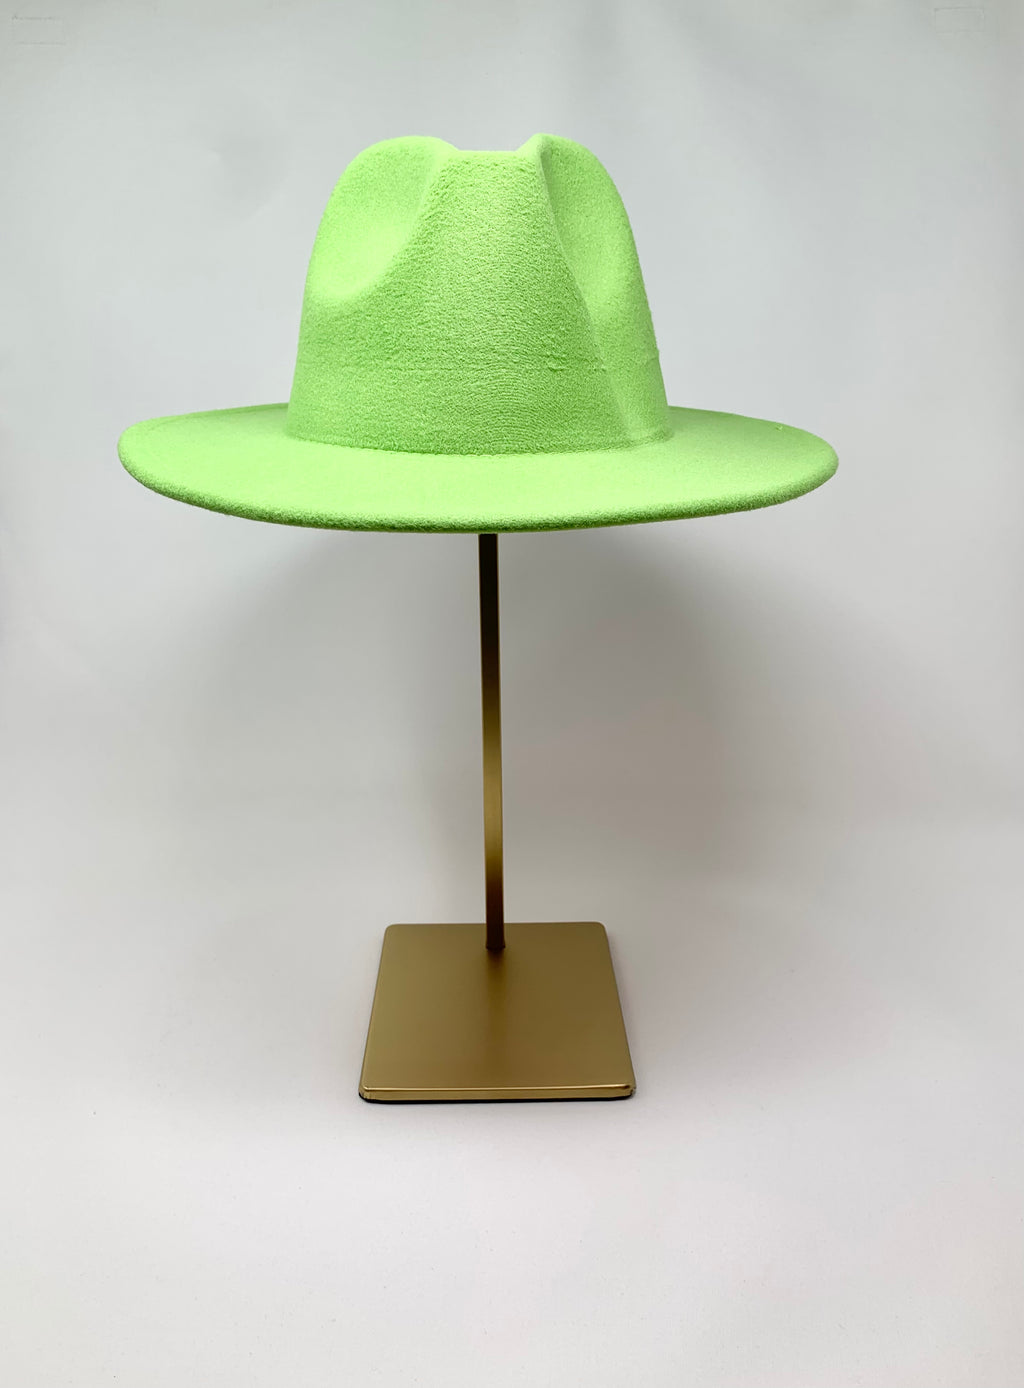 Pink and Green Fedora Hat